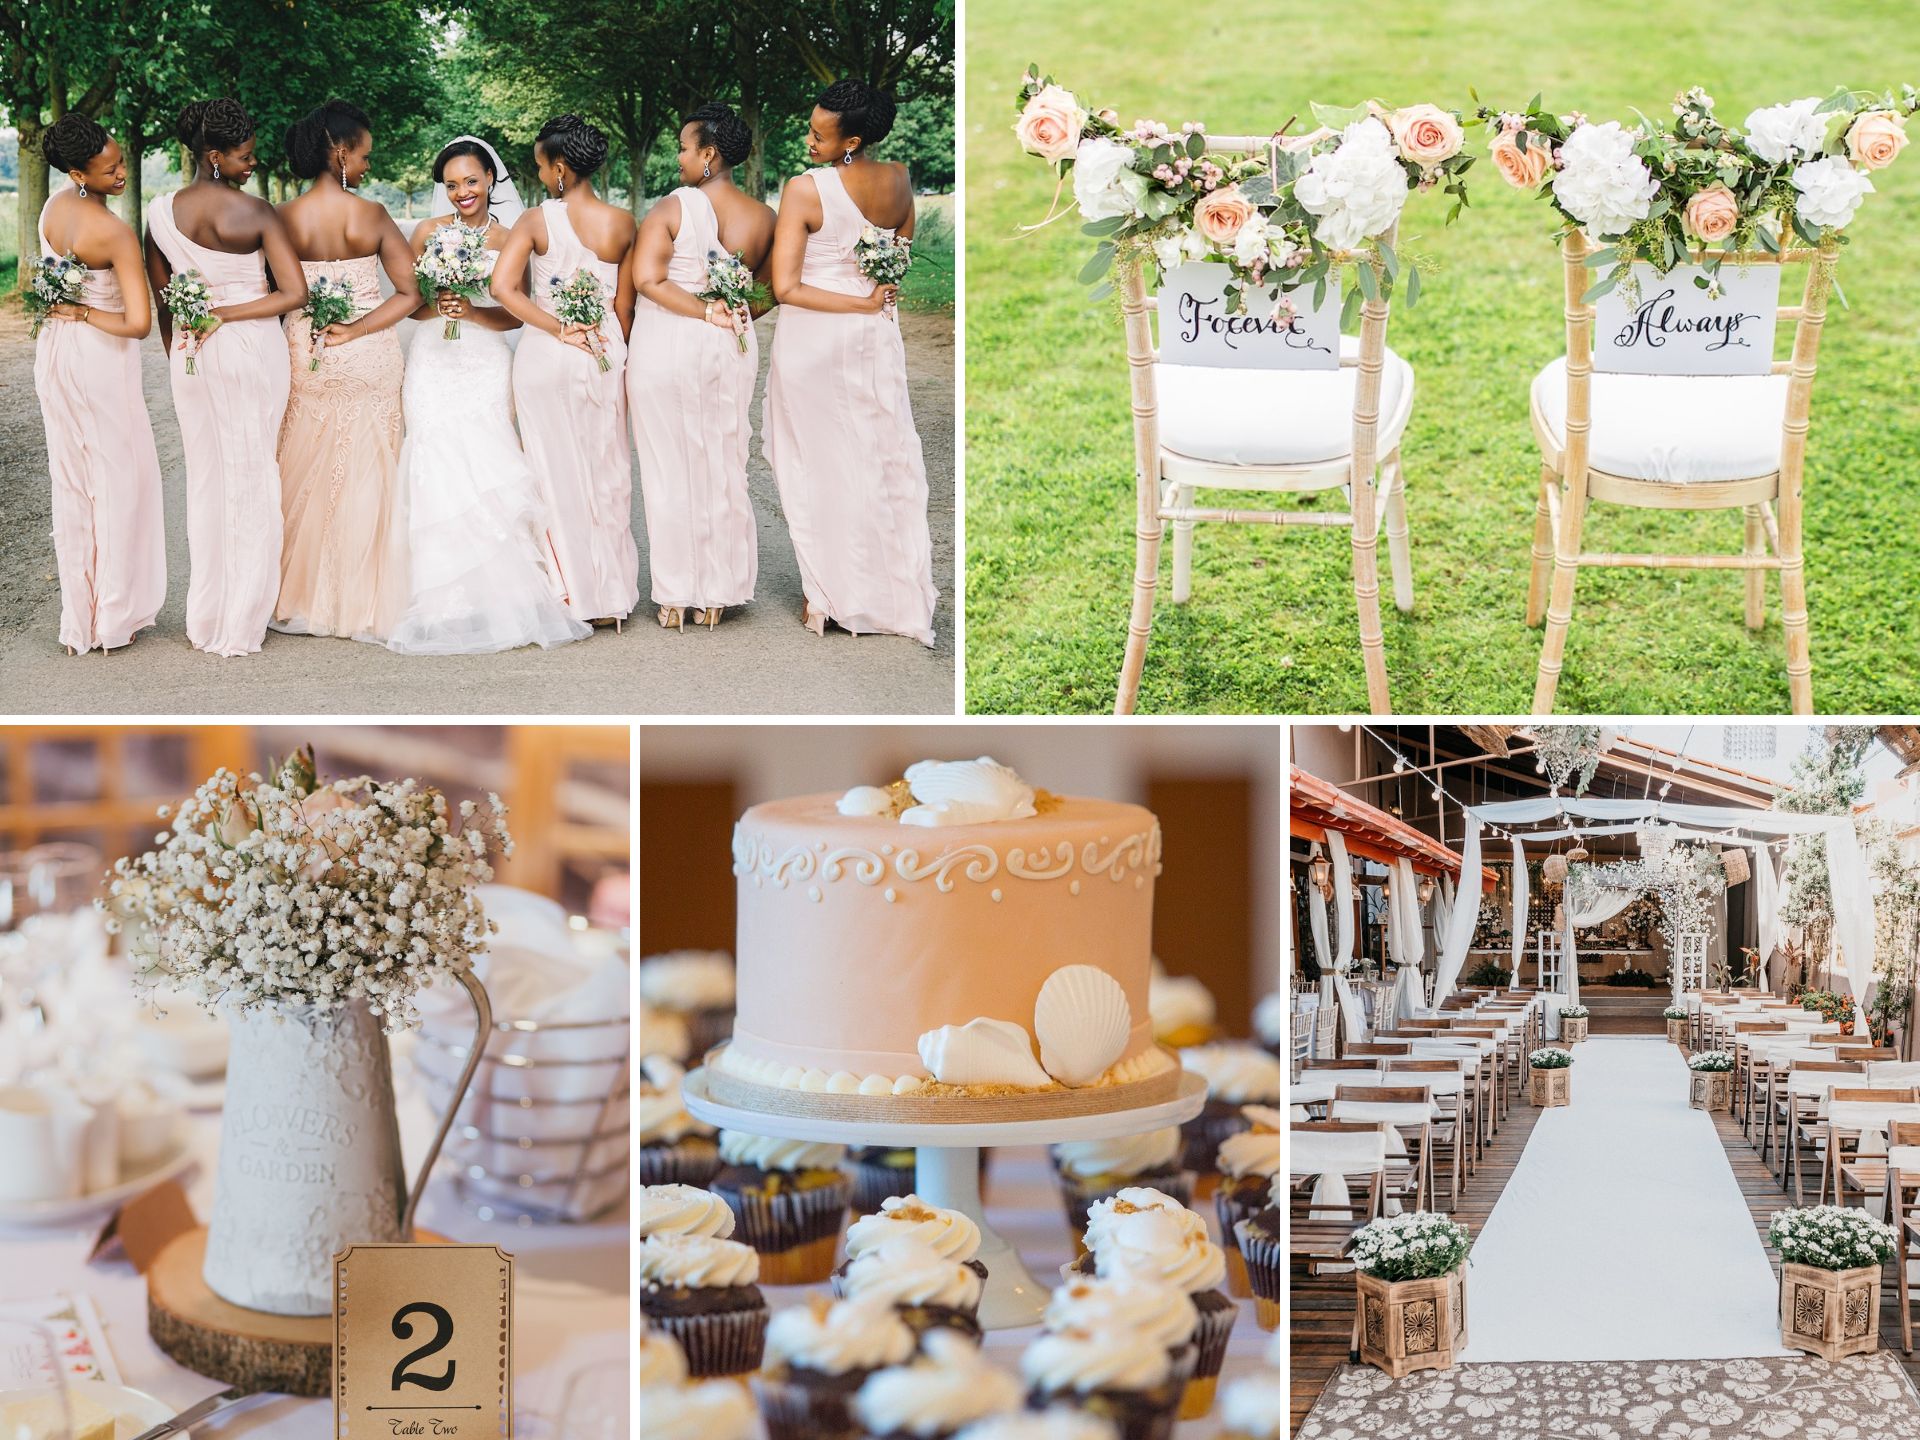 A photo collage with summer wedding color ideas.